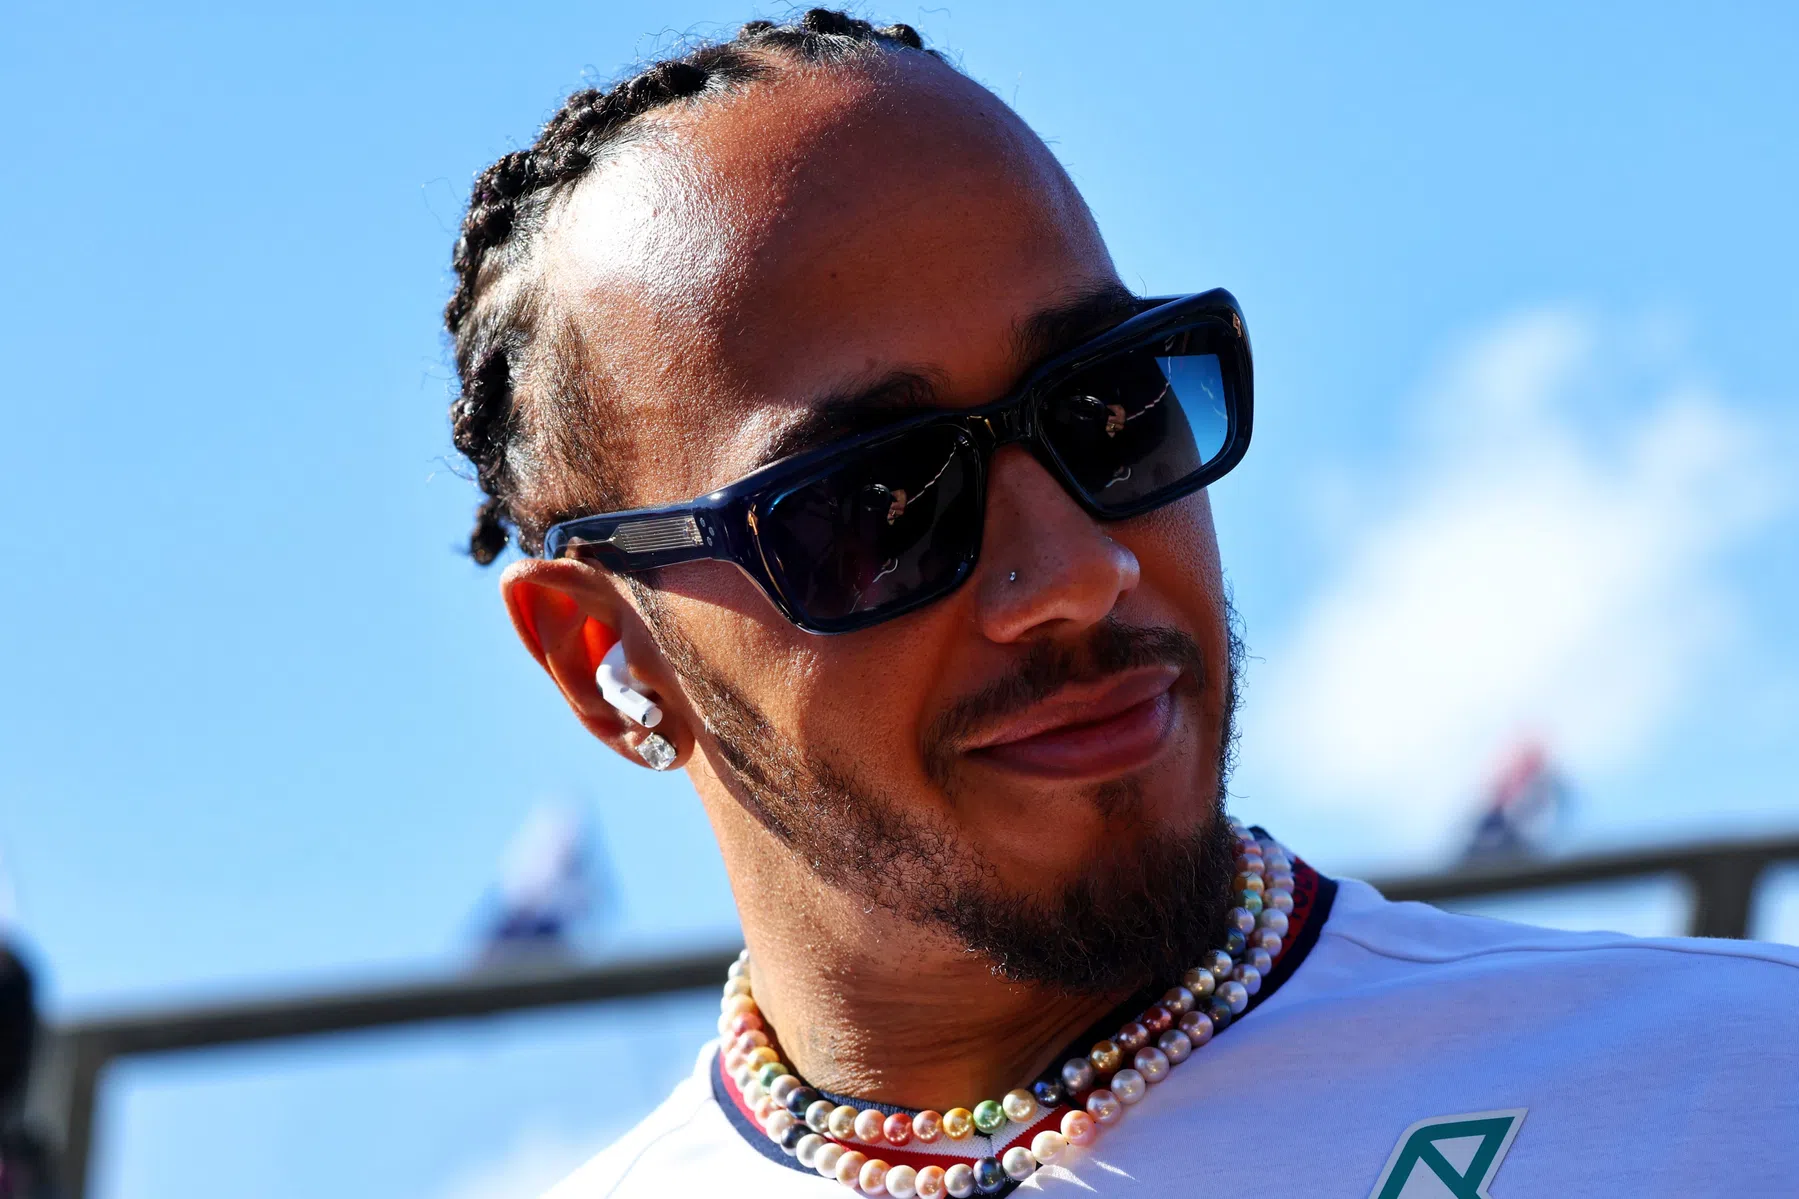 lewis hamilton on title fight 2021 and beyond